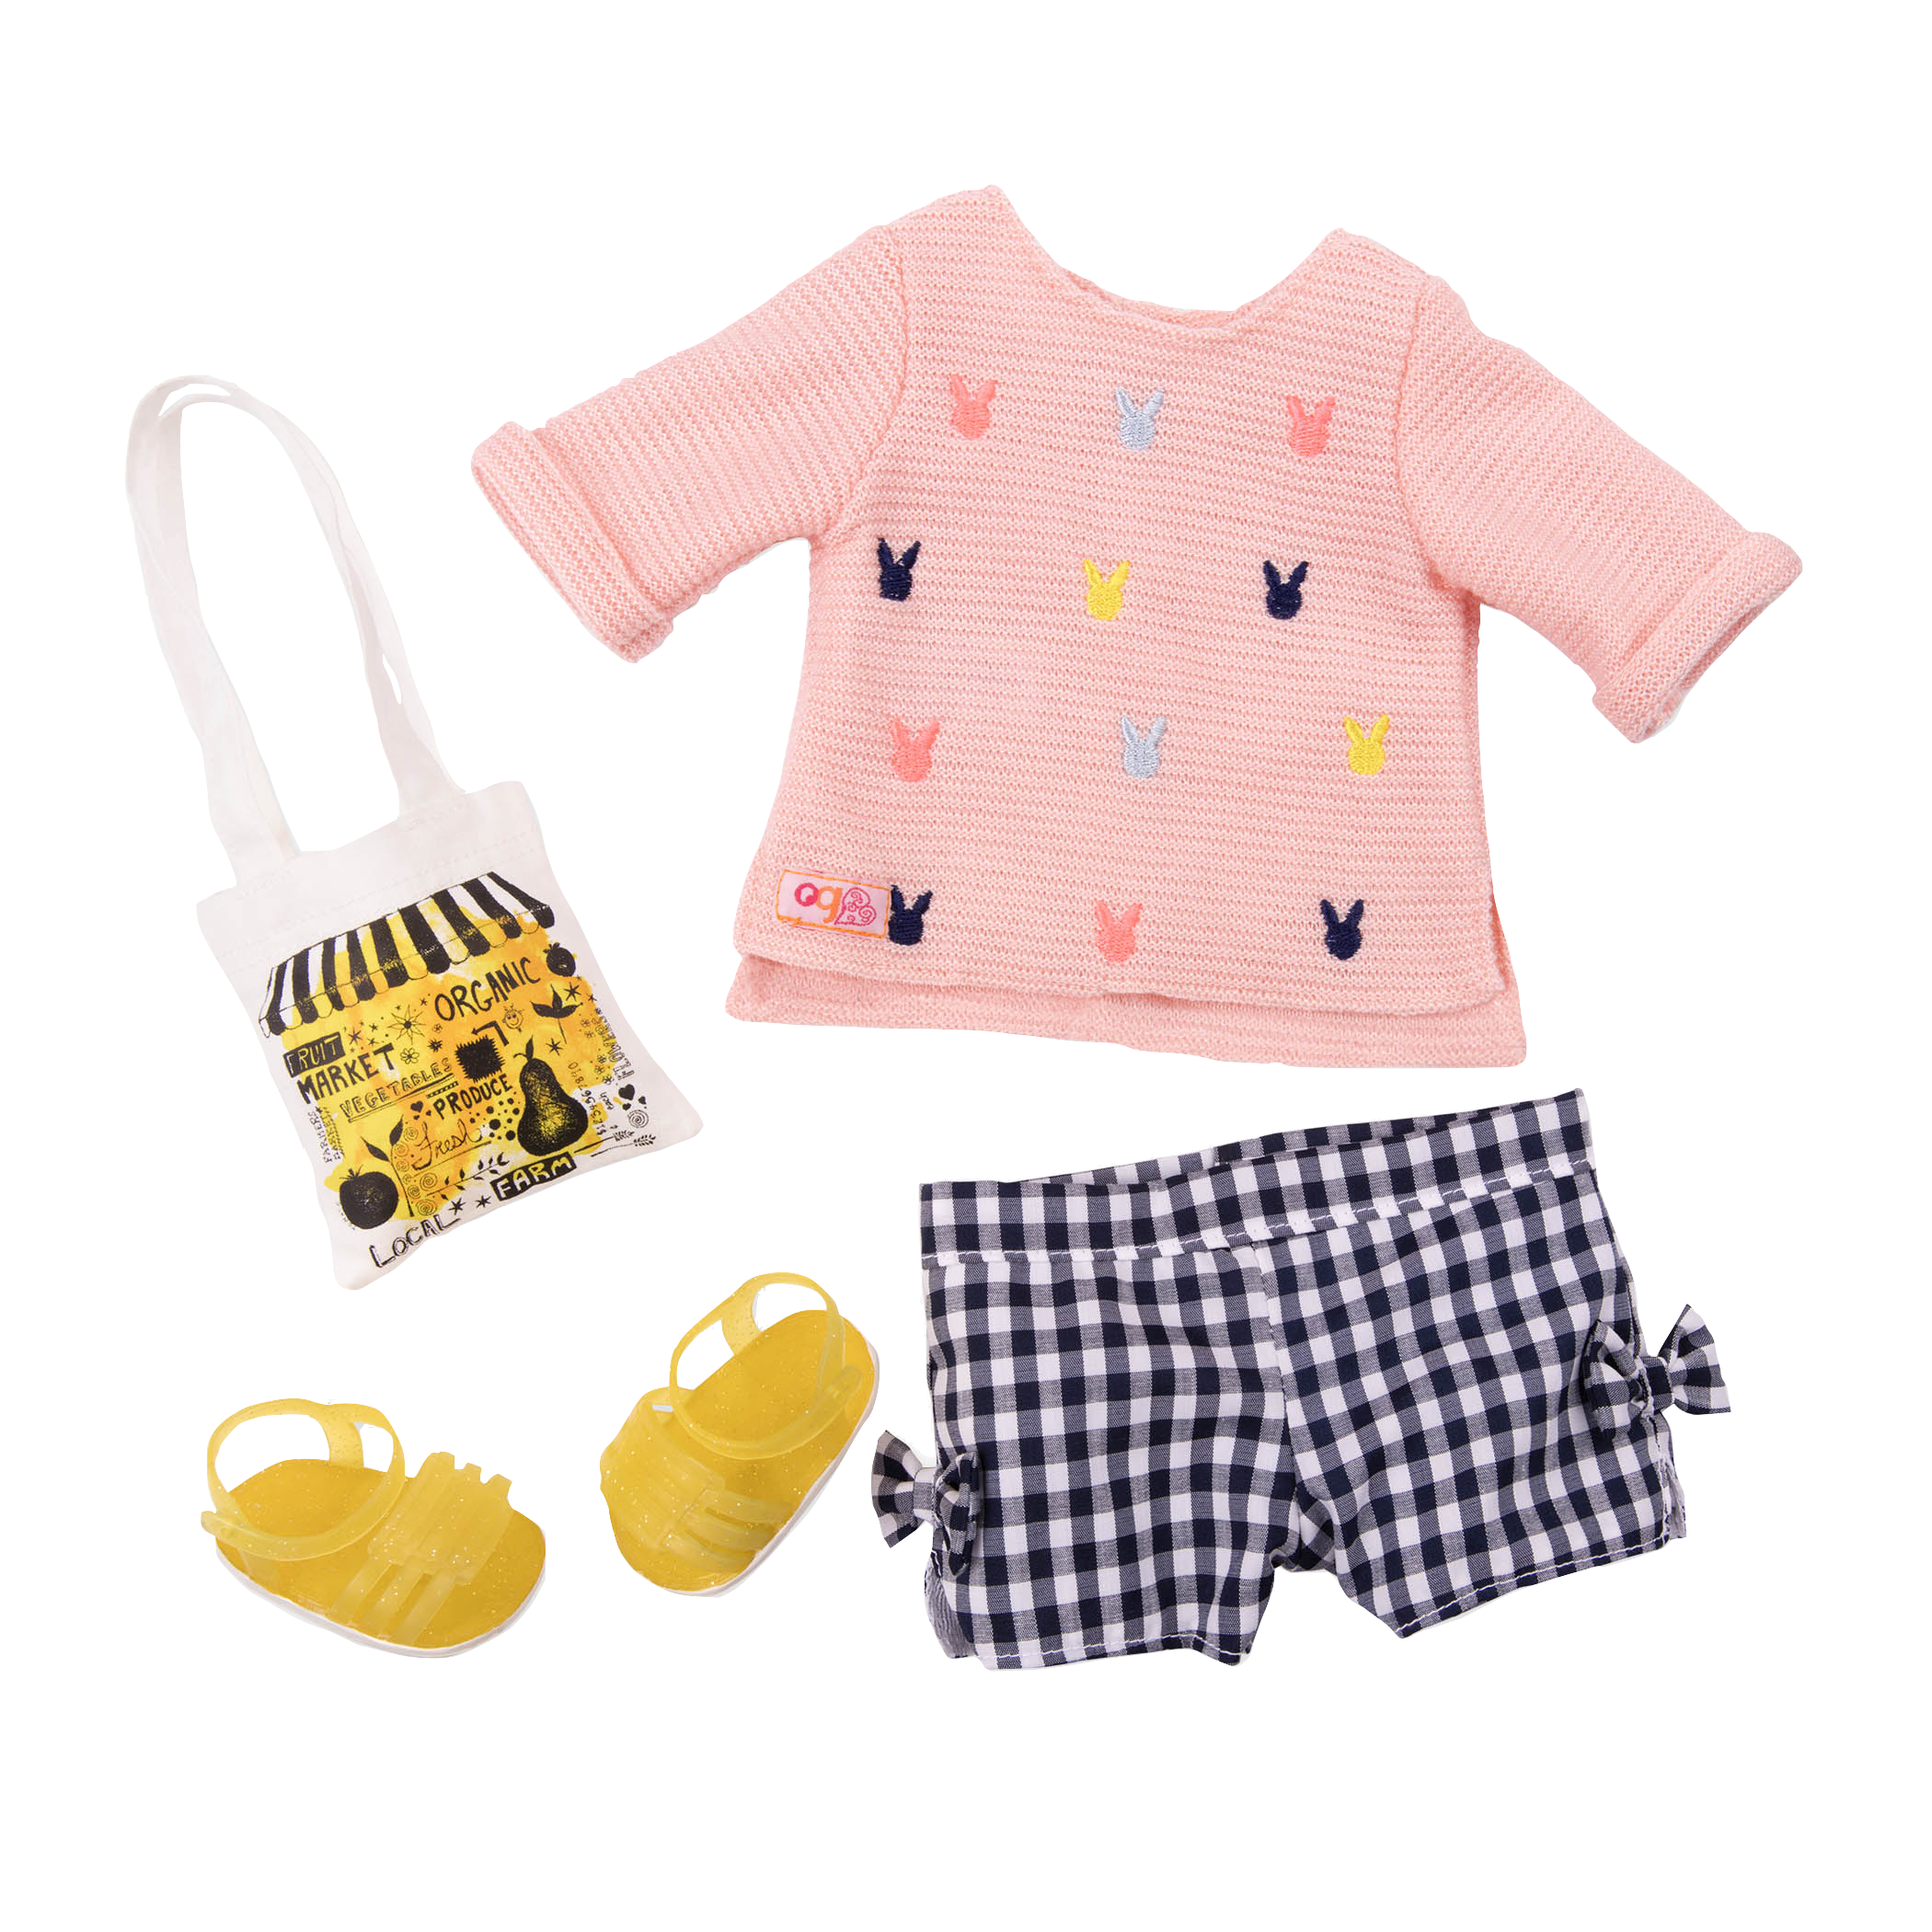 Market Day Summer Outfit for 18-inch Dolls